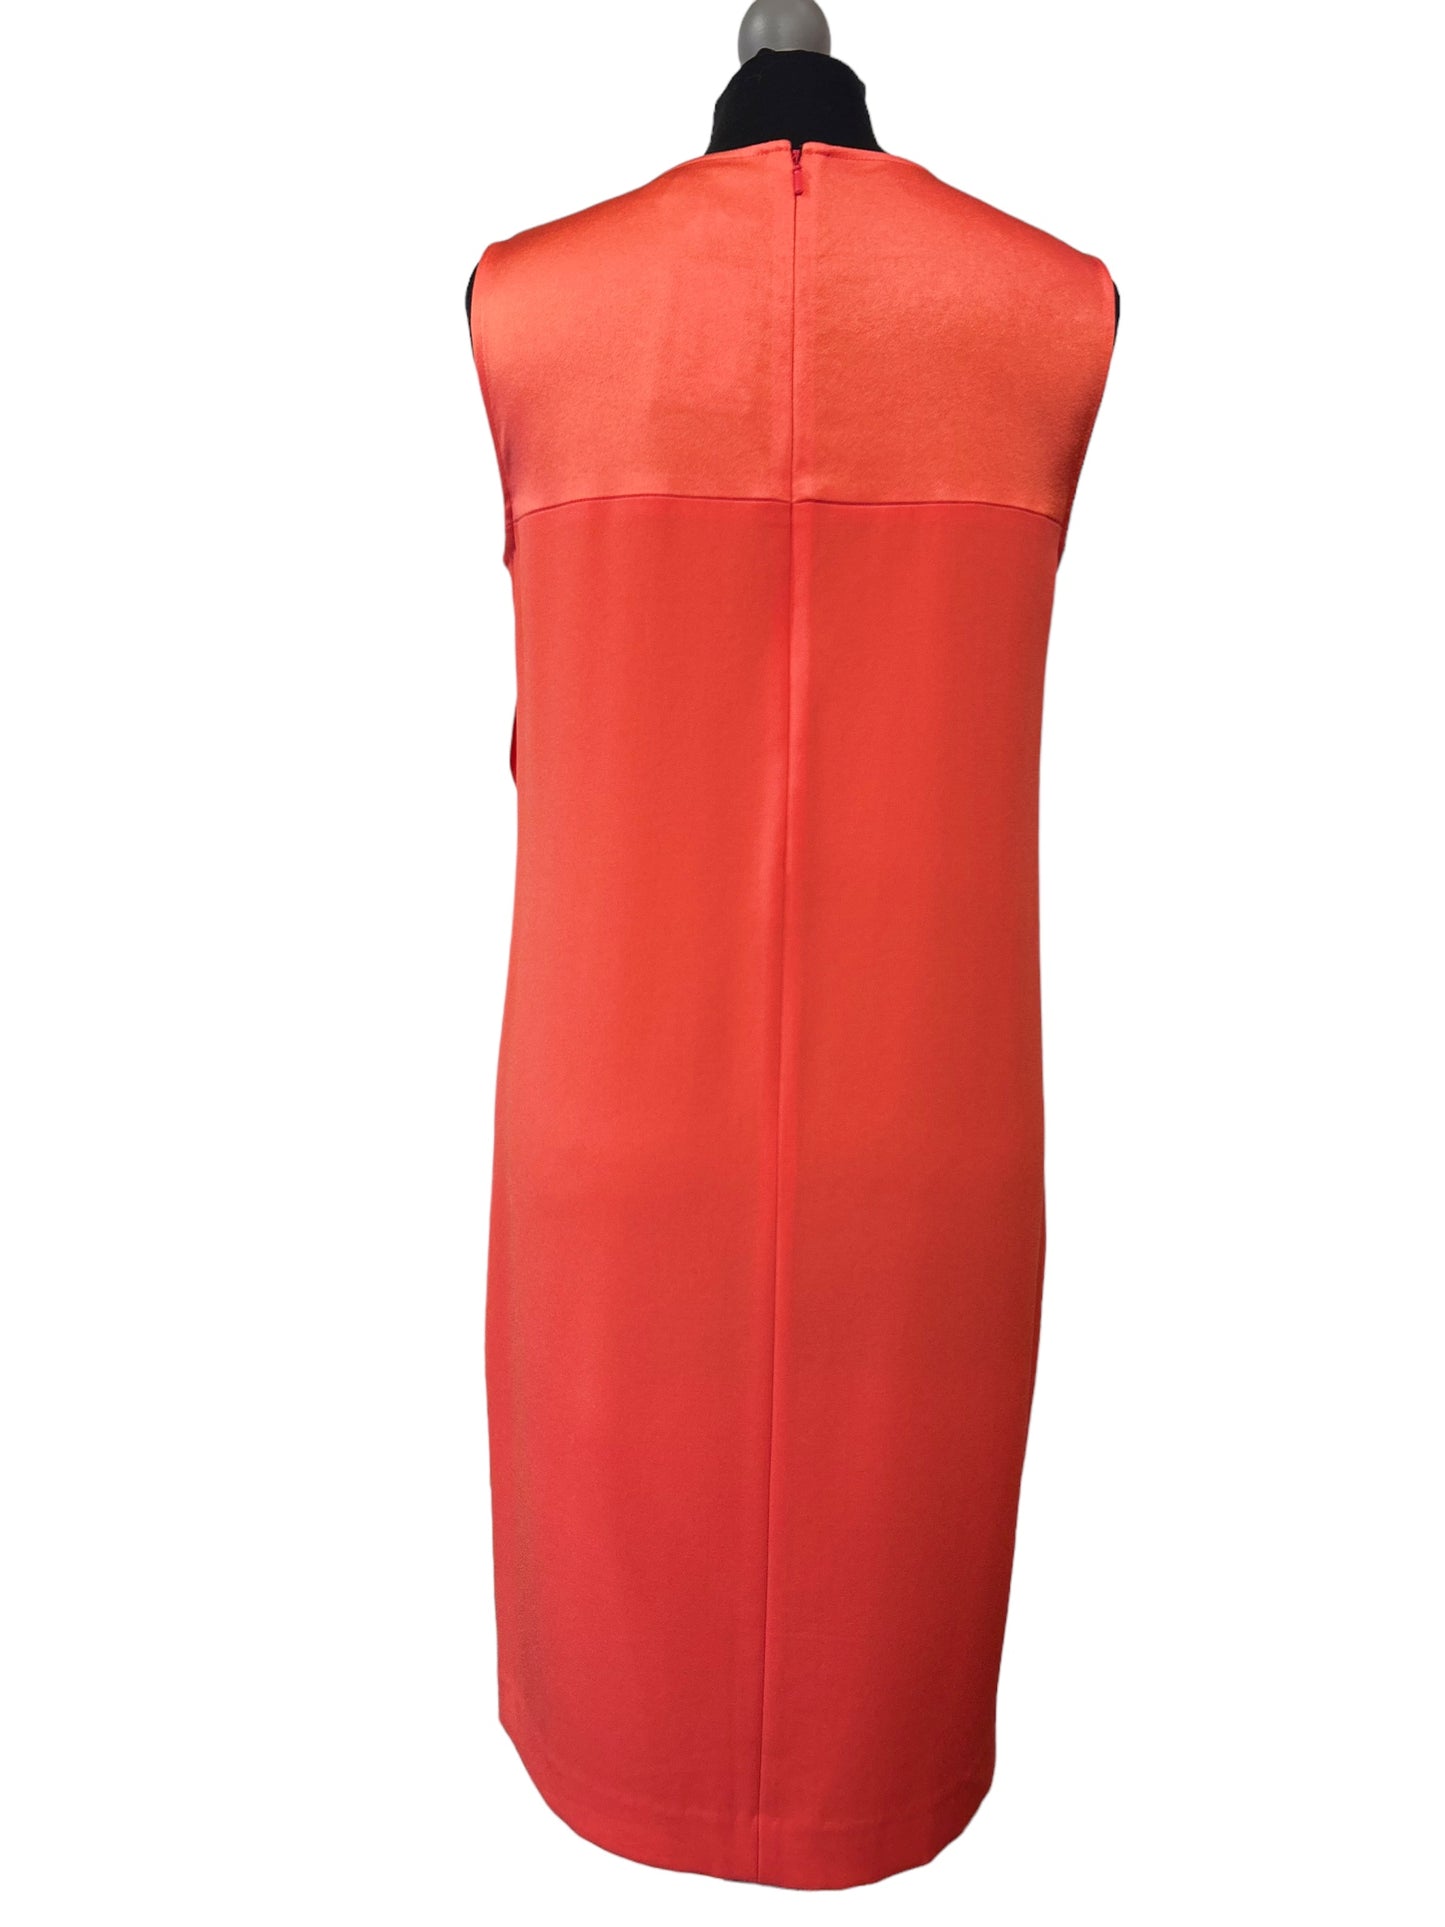 DKNY coral dress size Small